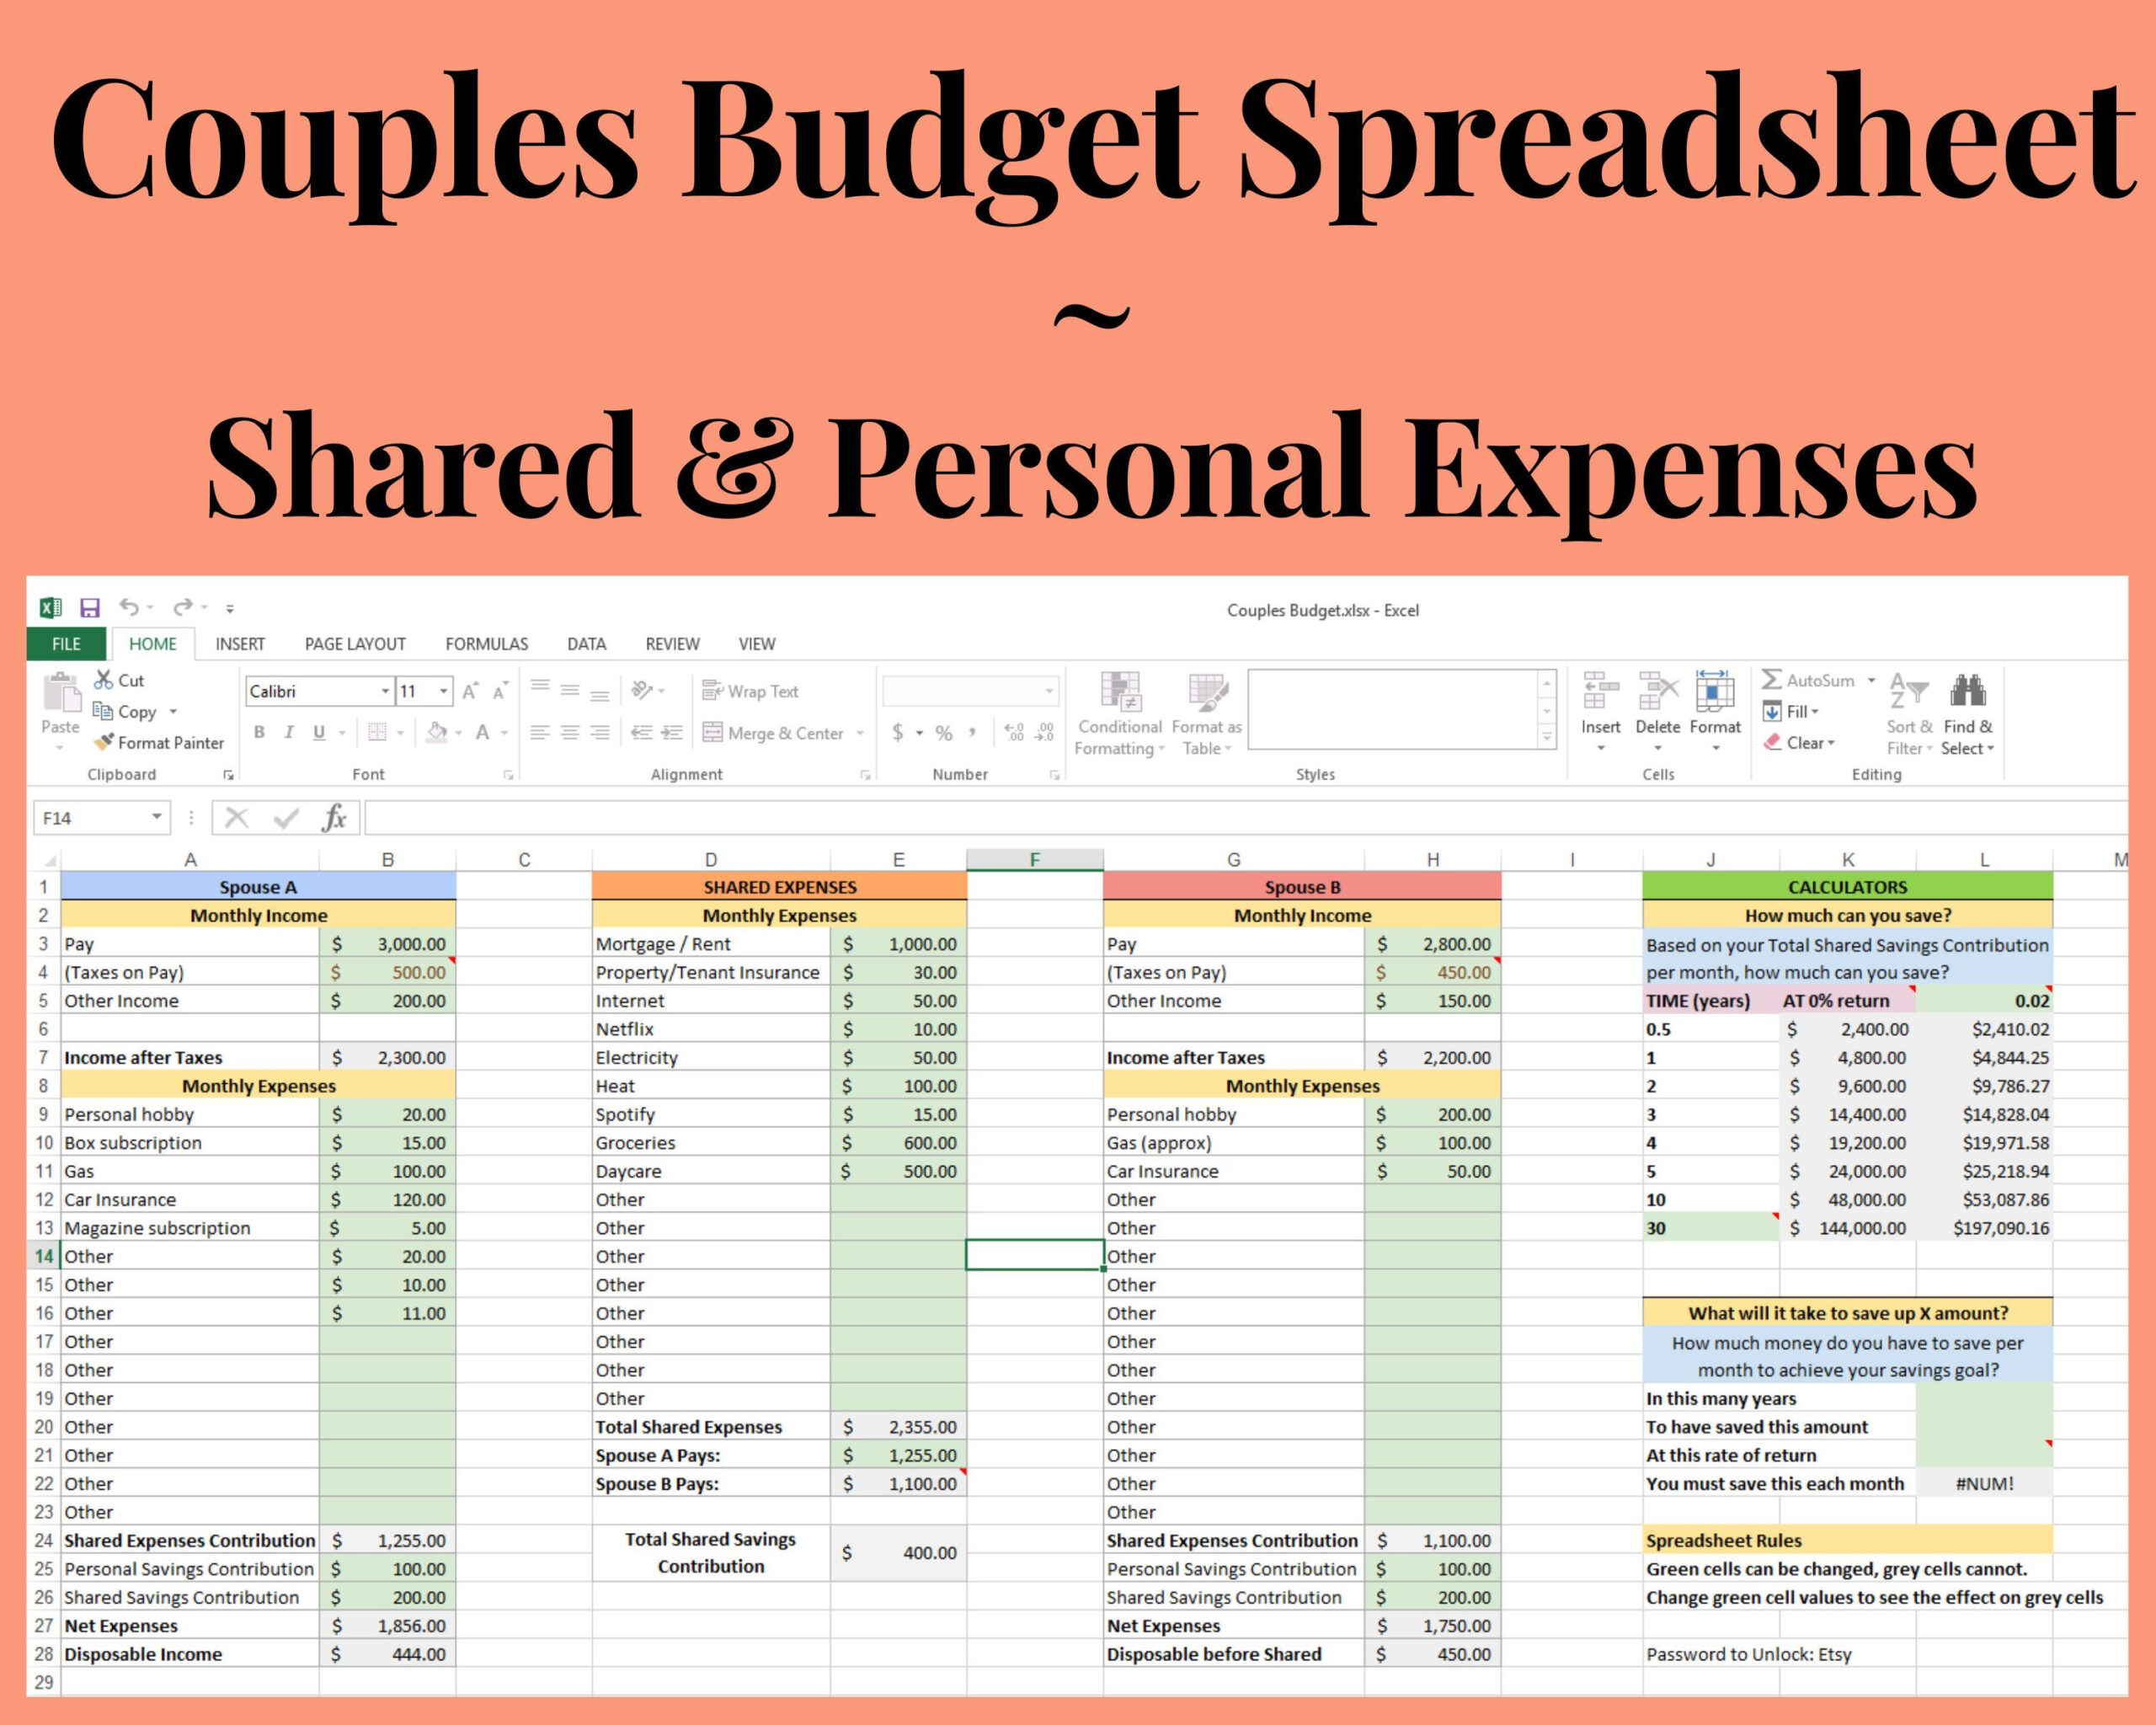 Couples Budget Spreadsheet With Shared And Personal Expenses And 